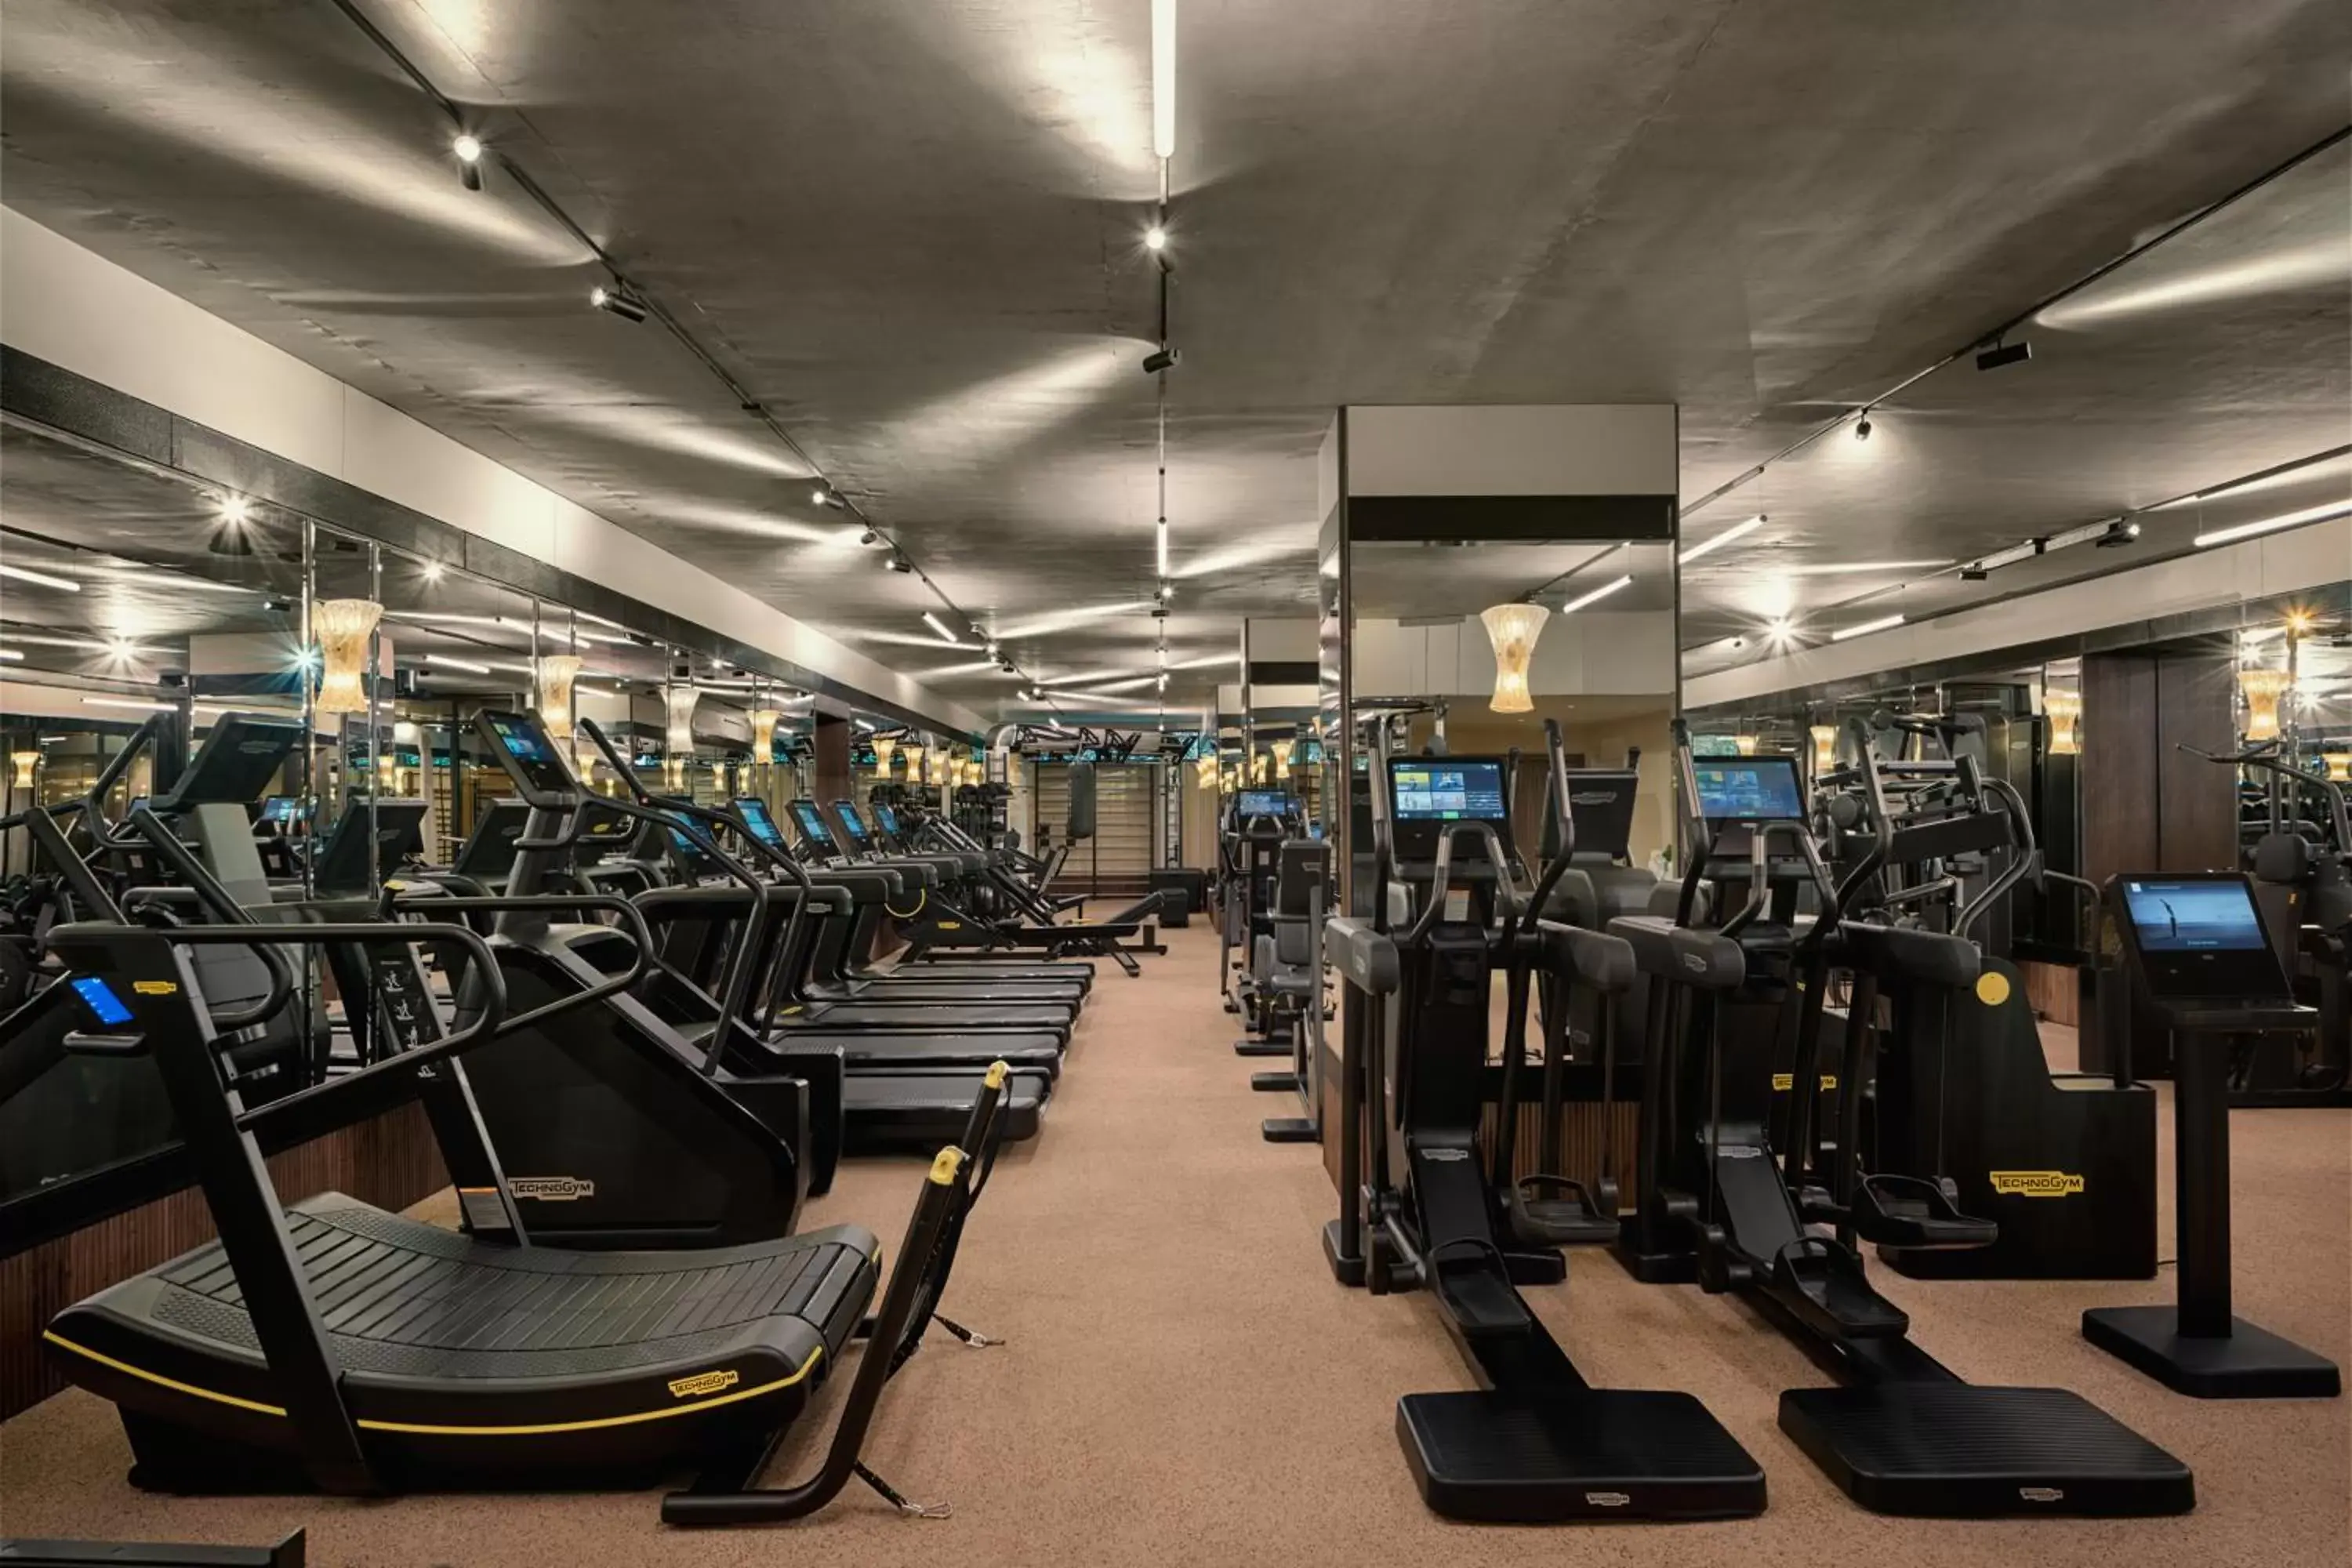 Fitness centre/facilities, Fitness Center/Facilities in Stradom House, Autograph Collection